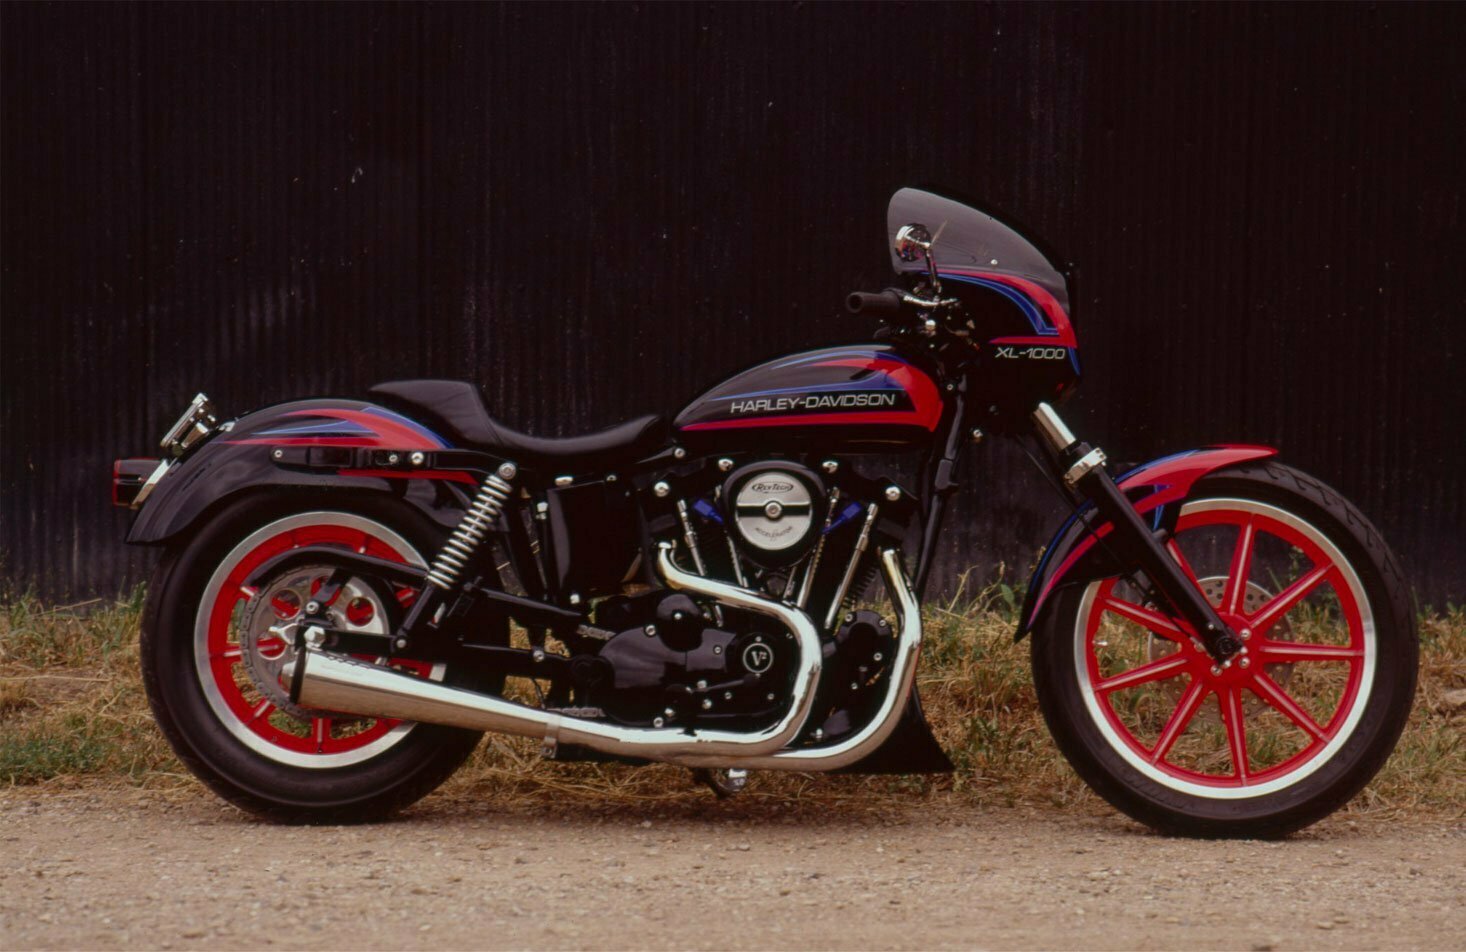 The neon-rose-finished 19- and 16-inch rims on this Sportster XL 1000 really pop.